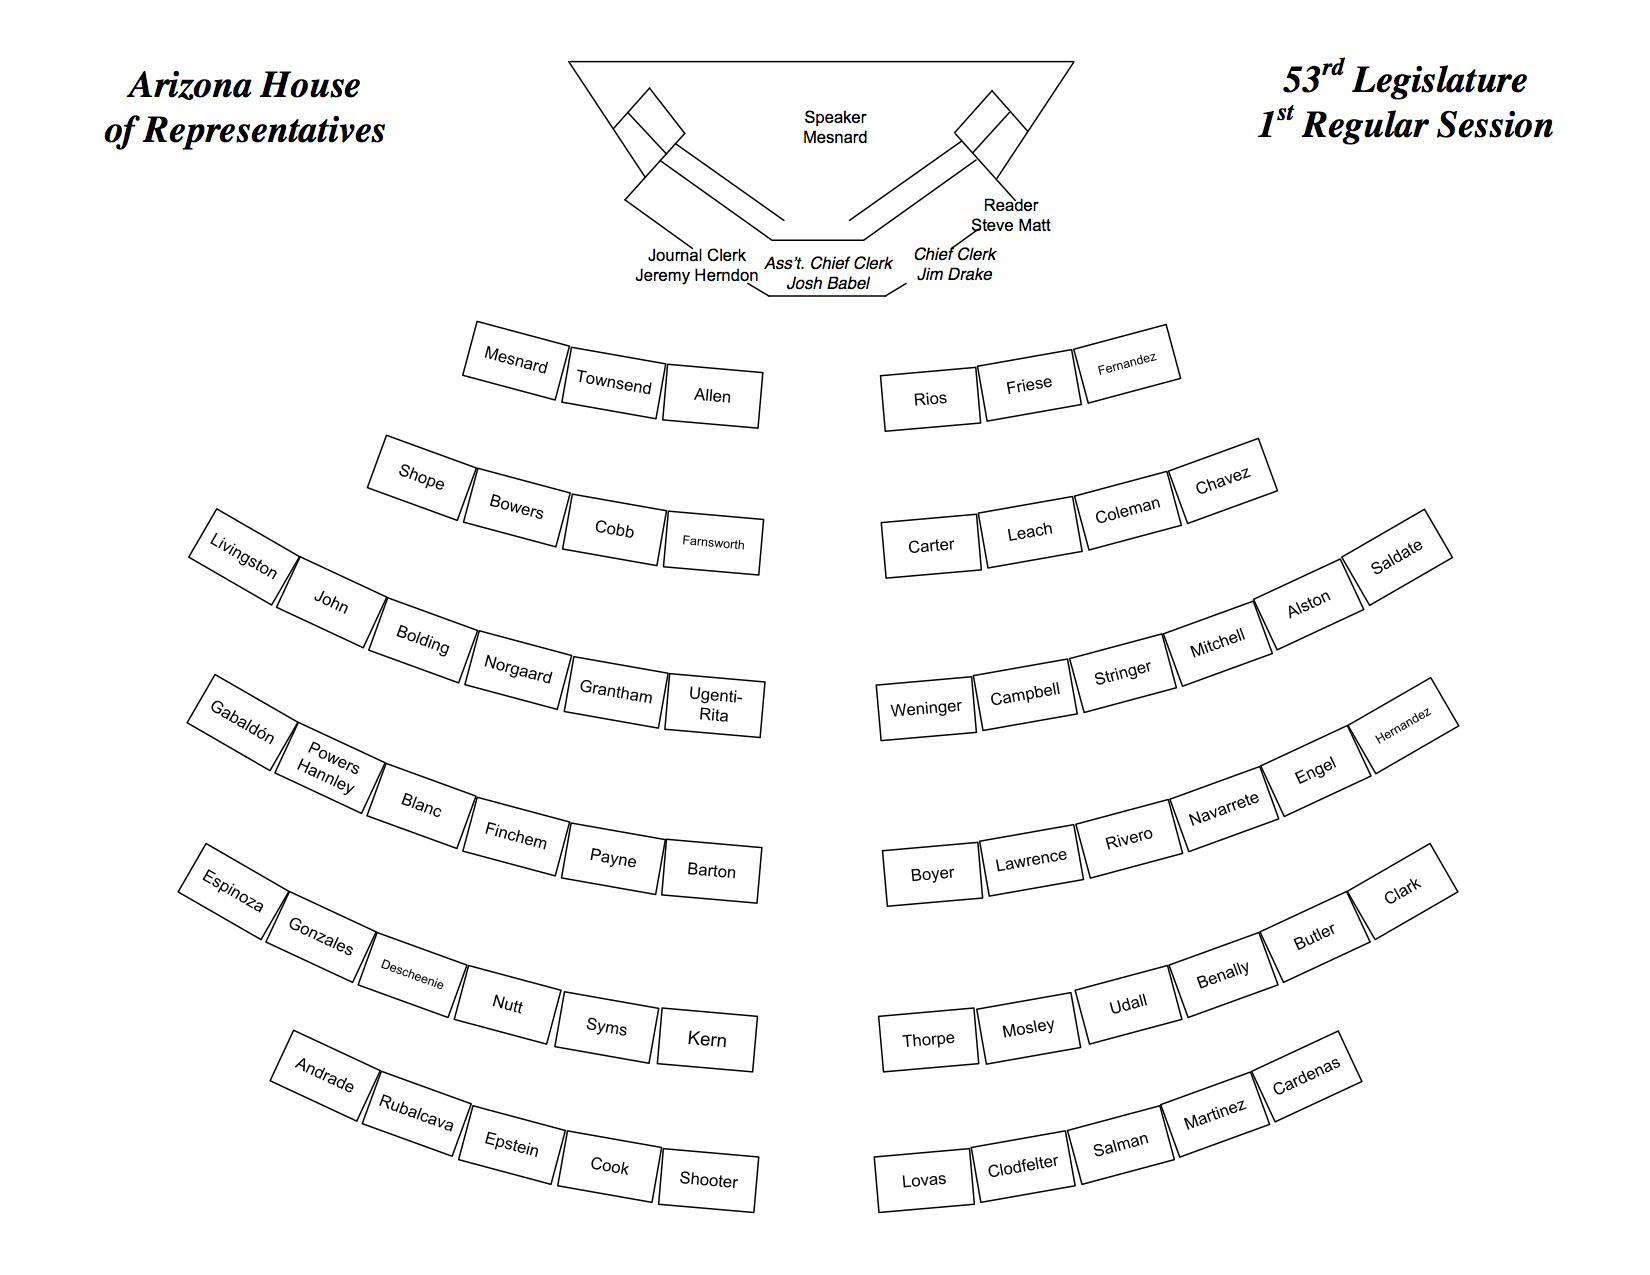 House Seating Chart – Guide to the 53rd Legislature, 1st Regular Session